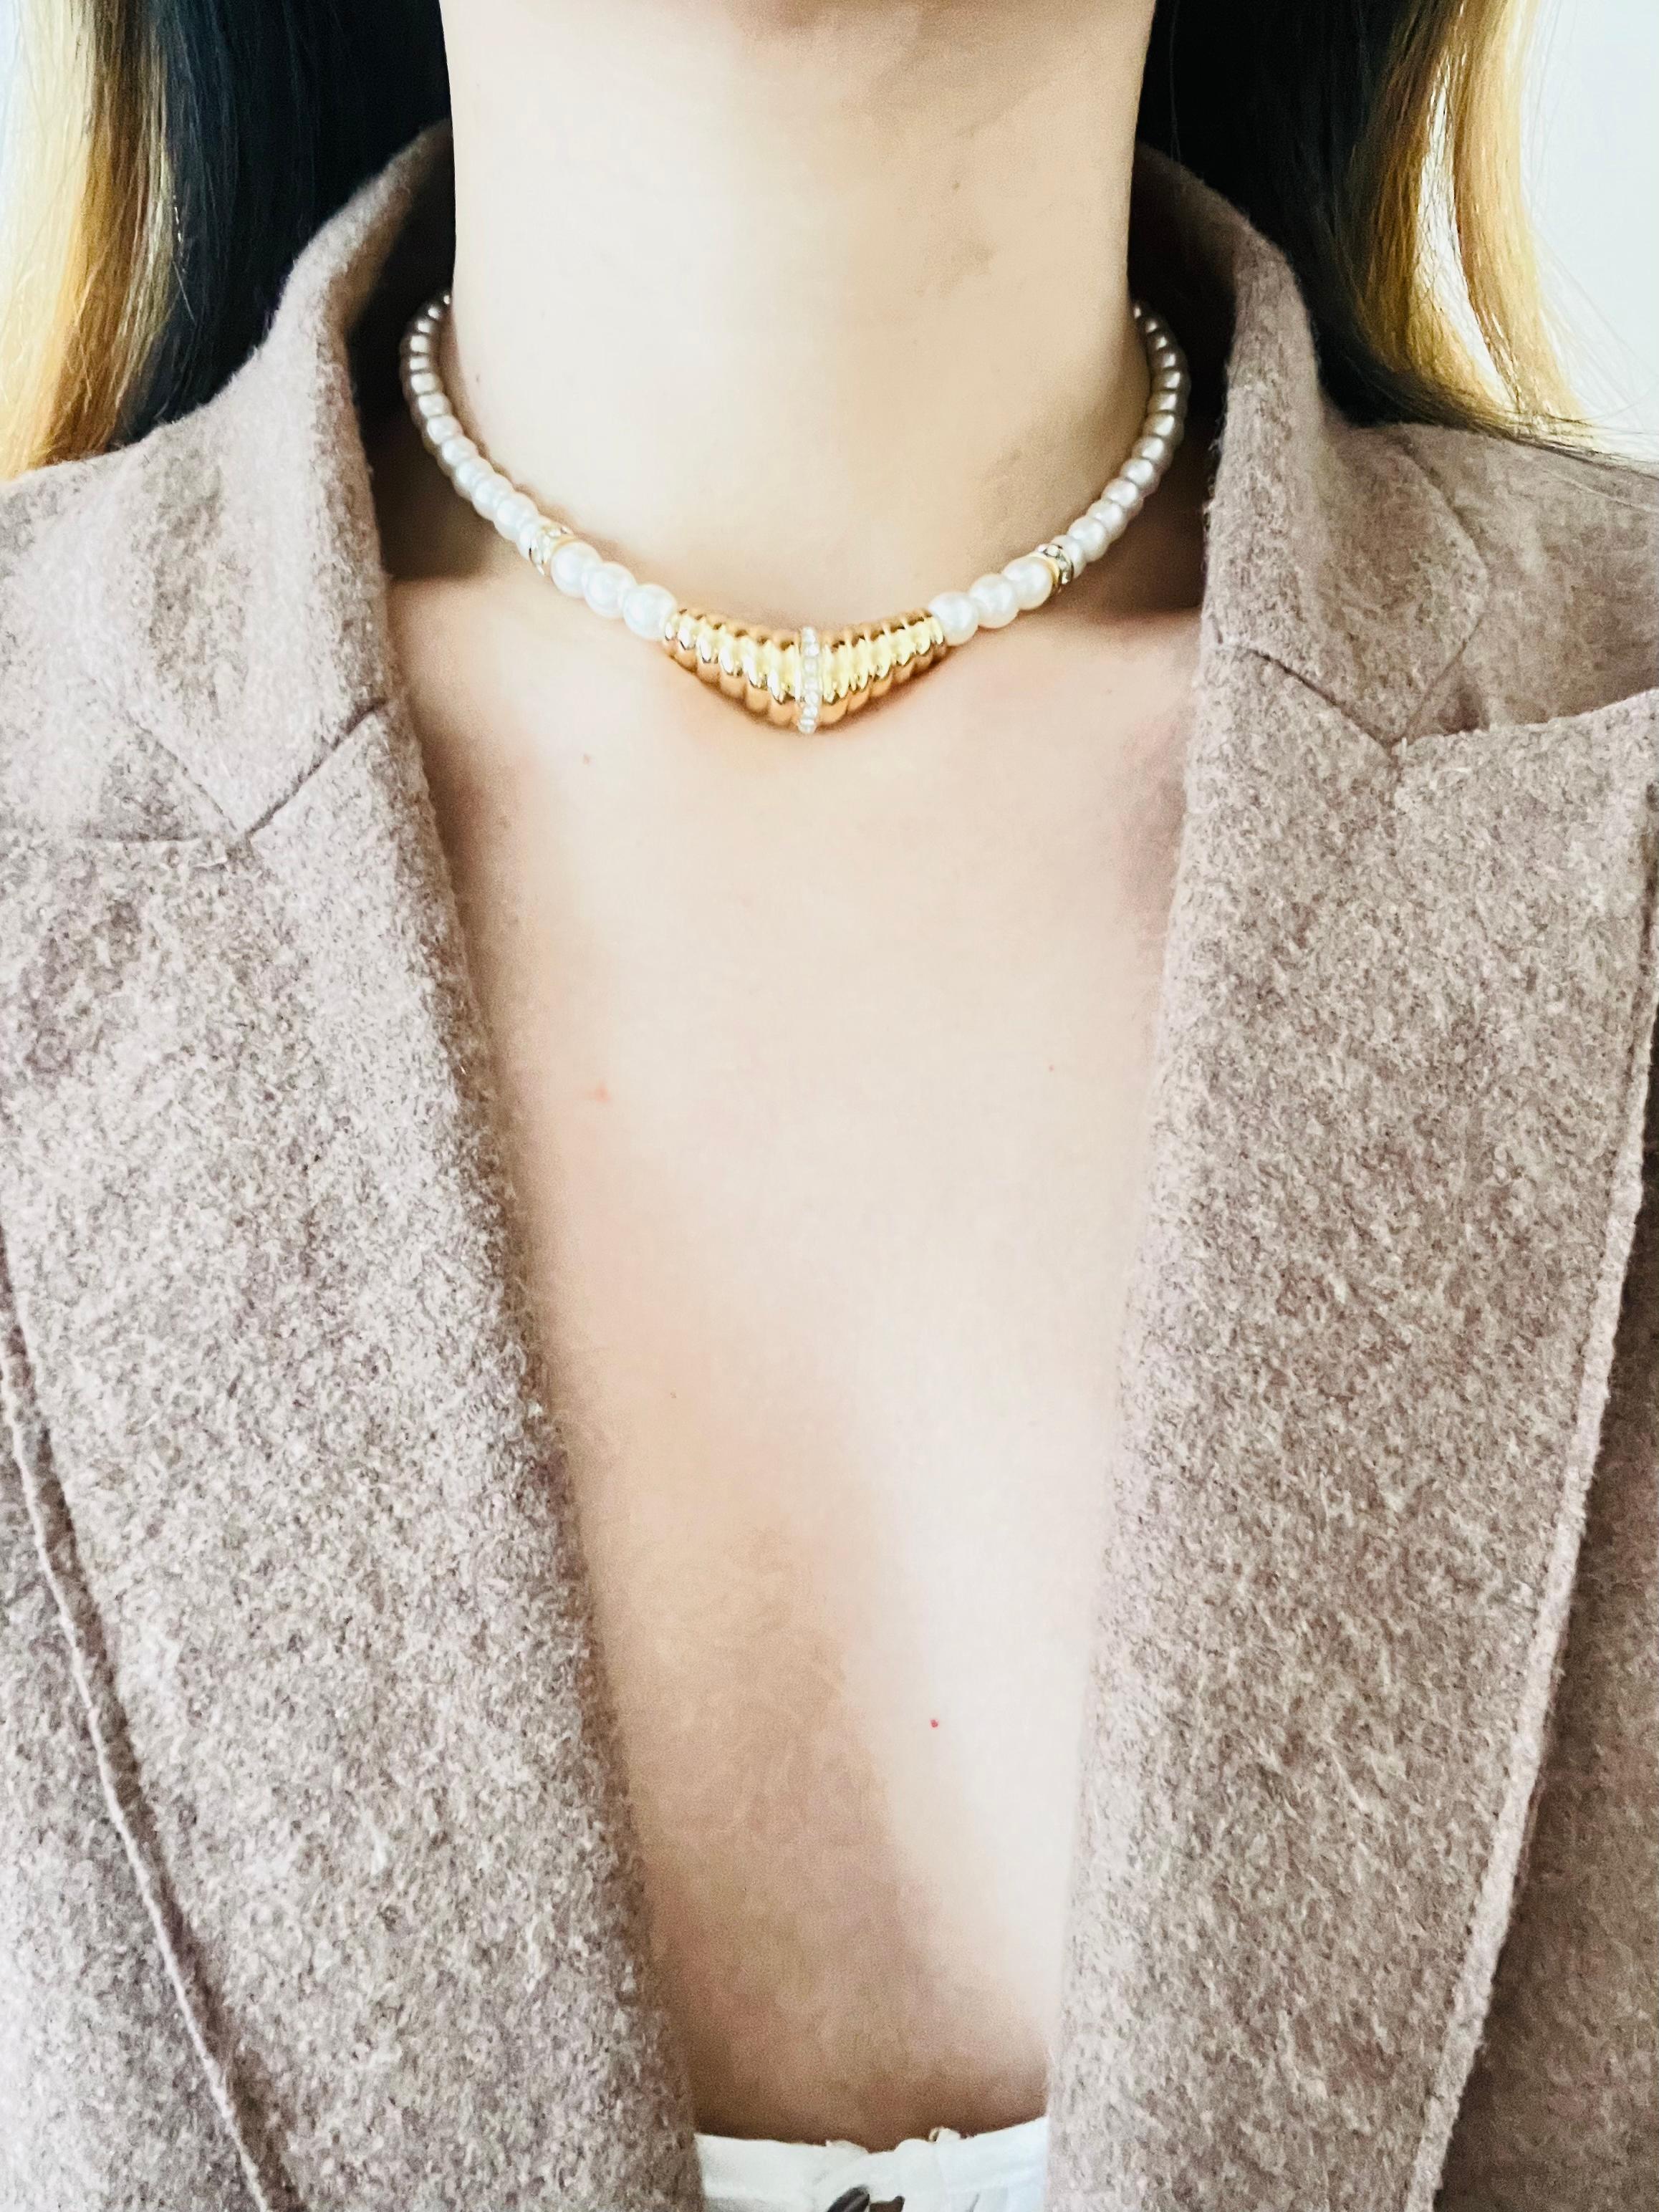 Christian Dior Vintage 1970s White Pearls Triangle Crystals Pendant Necklace For Sale 1